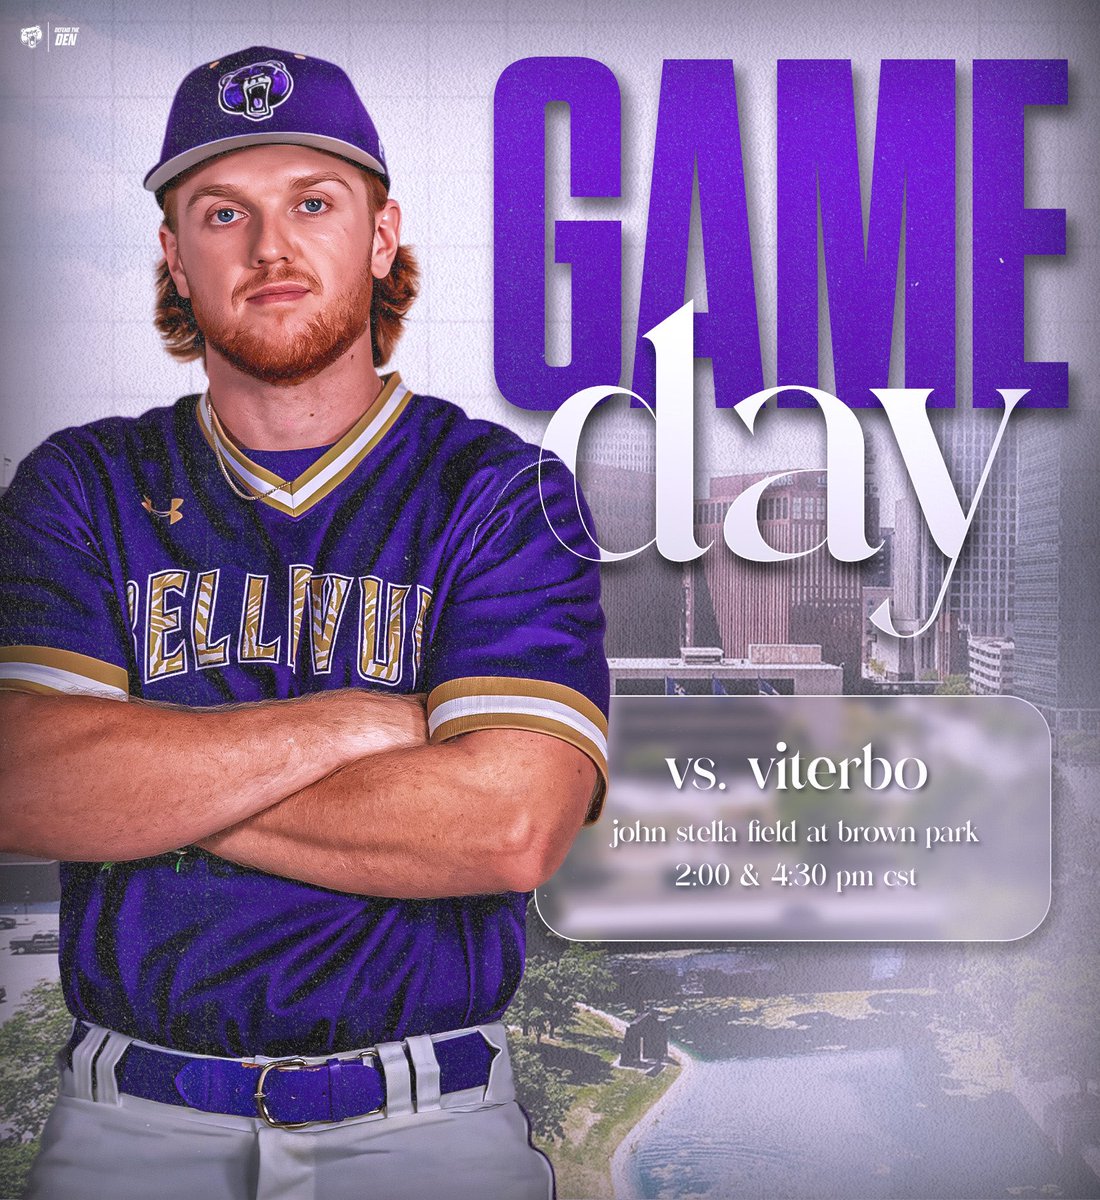 Come out and support the Bruins in the final home game of the year! 🆚 Viterbo ⏰ 2:00 & 4:30 pm CST 📍John Stella Field at Brown Park #DefendTheDen